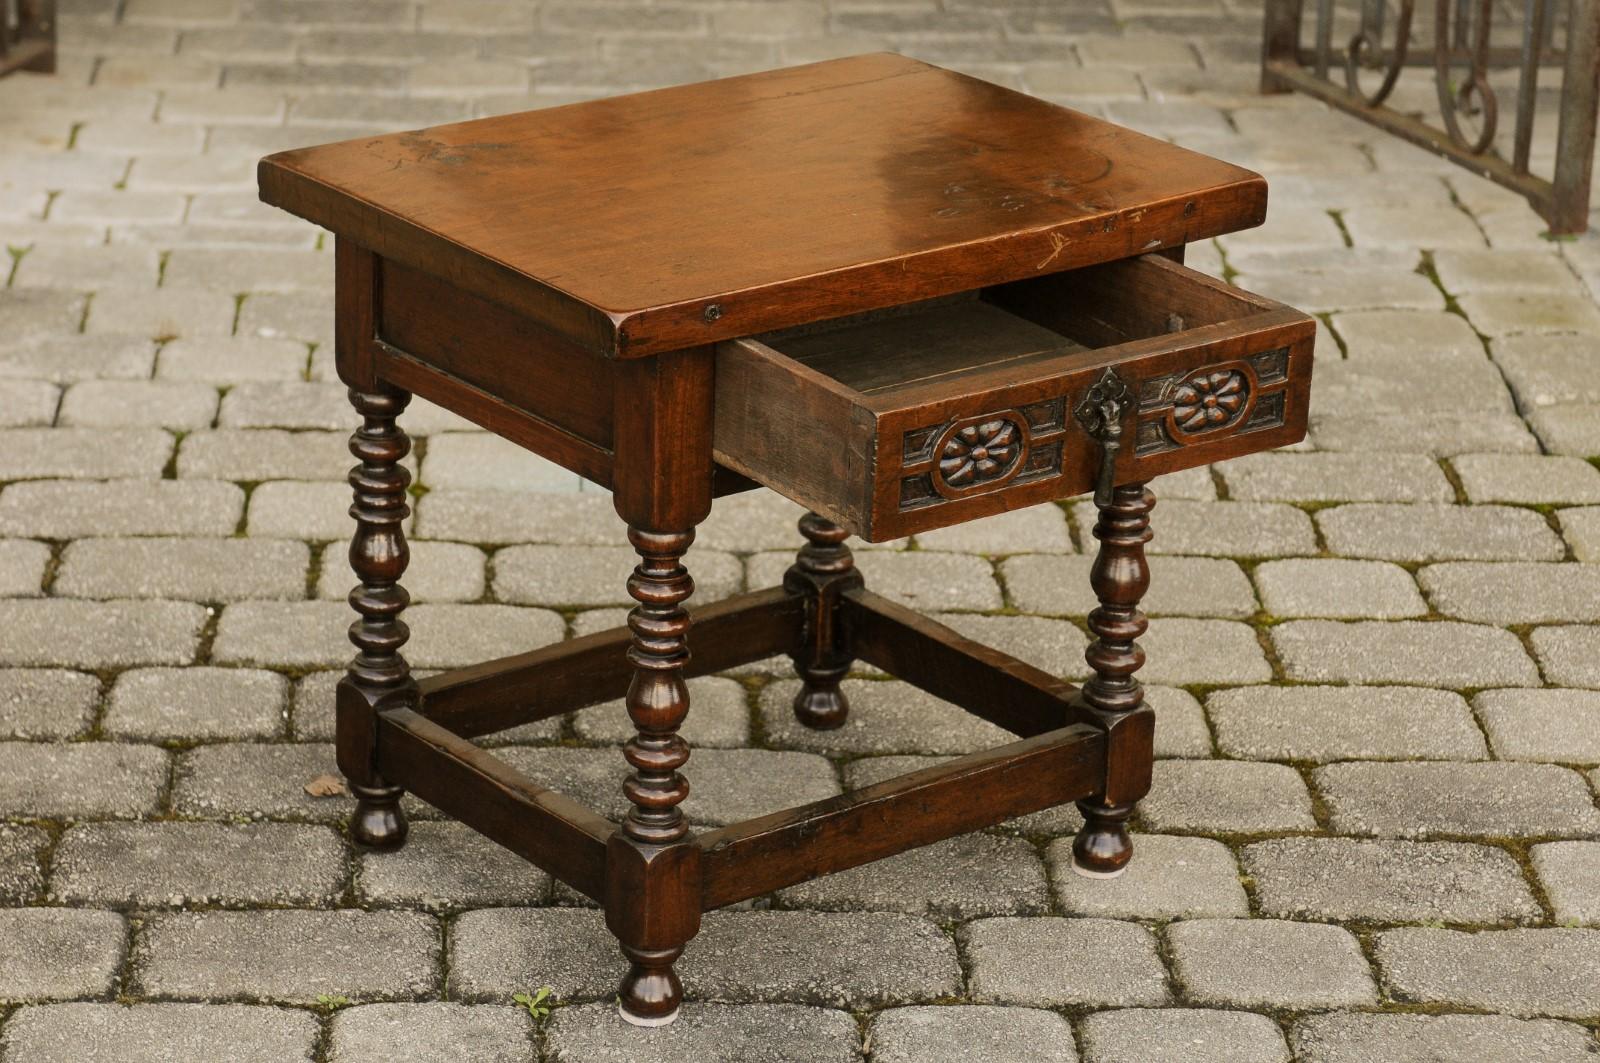 Italian 1900s Walnut Side Table with Drawer, Carved Rosettes and Turned Legs For Sale 2